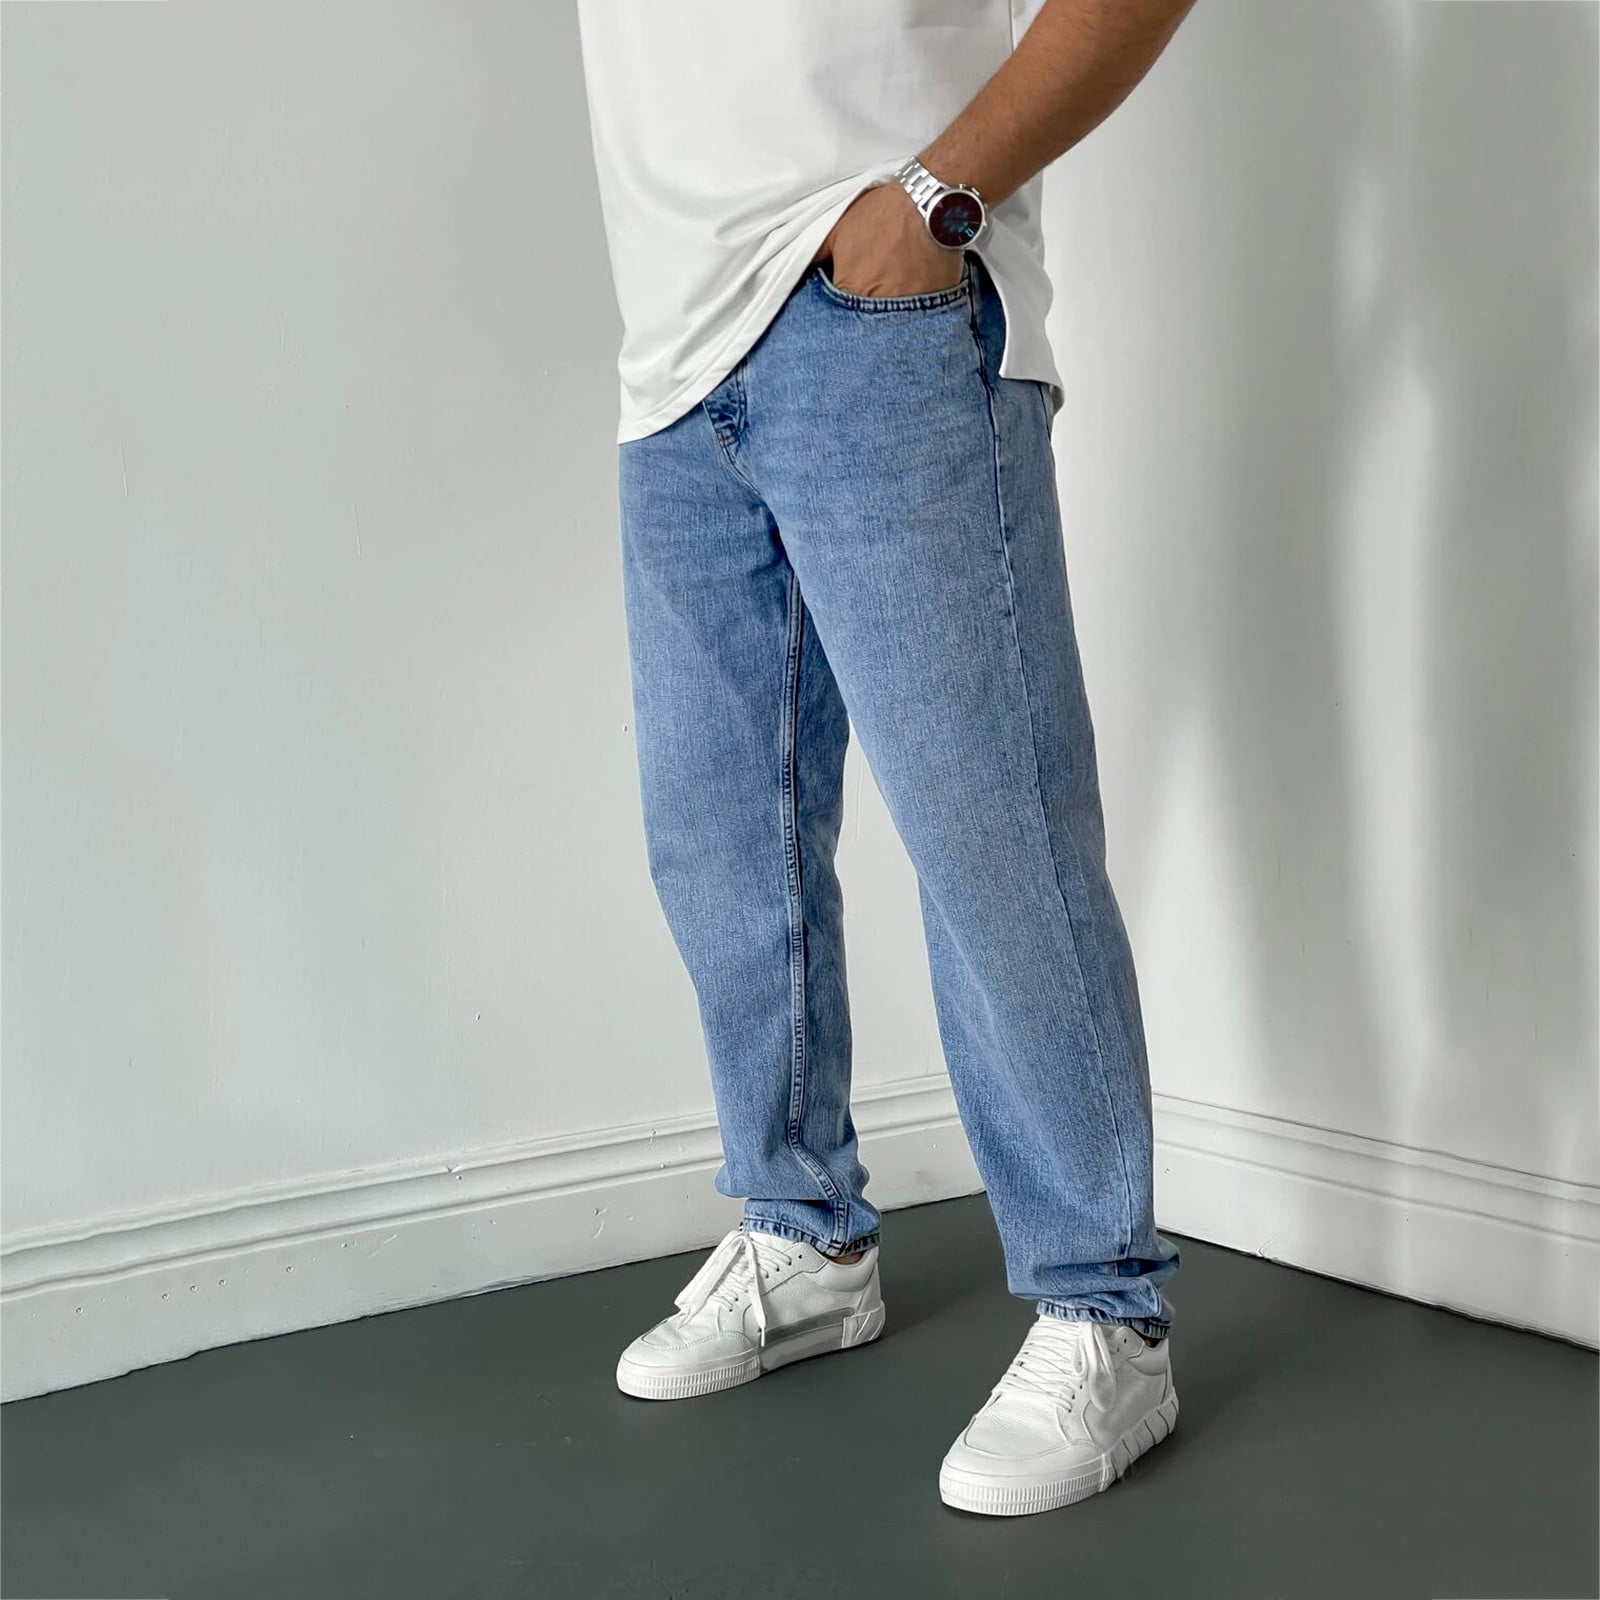 Top more than 213 baggy fit jeans best